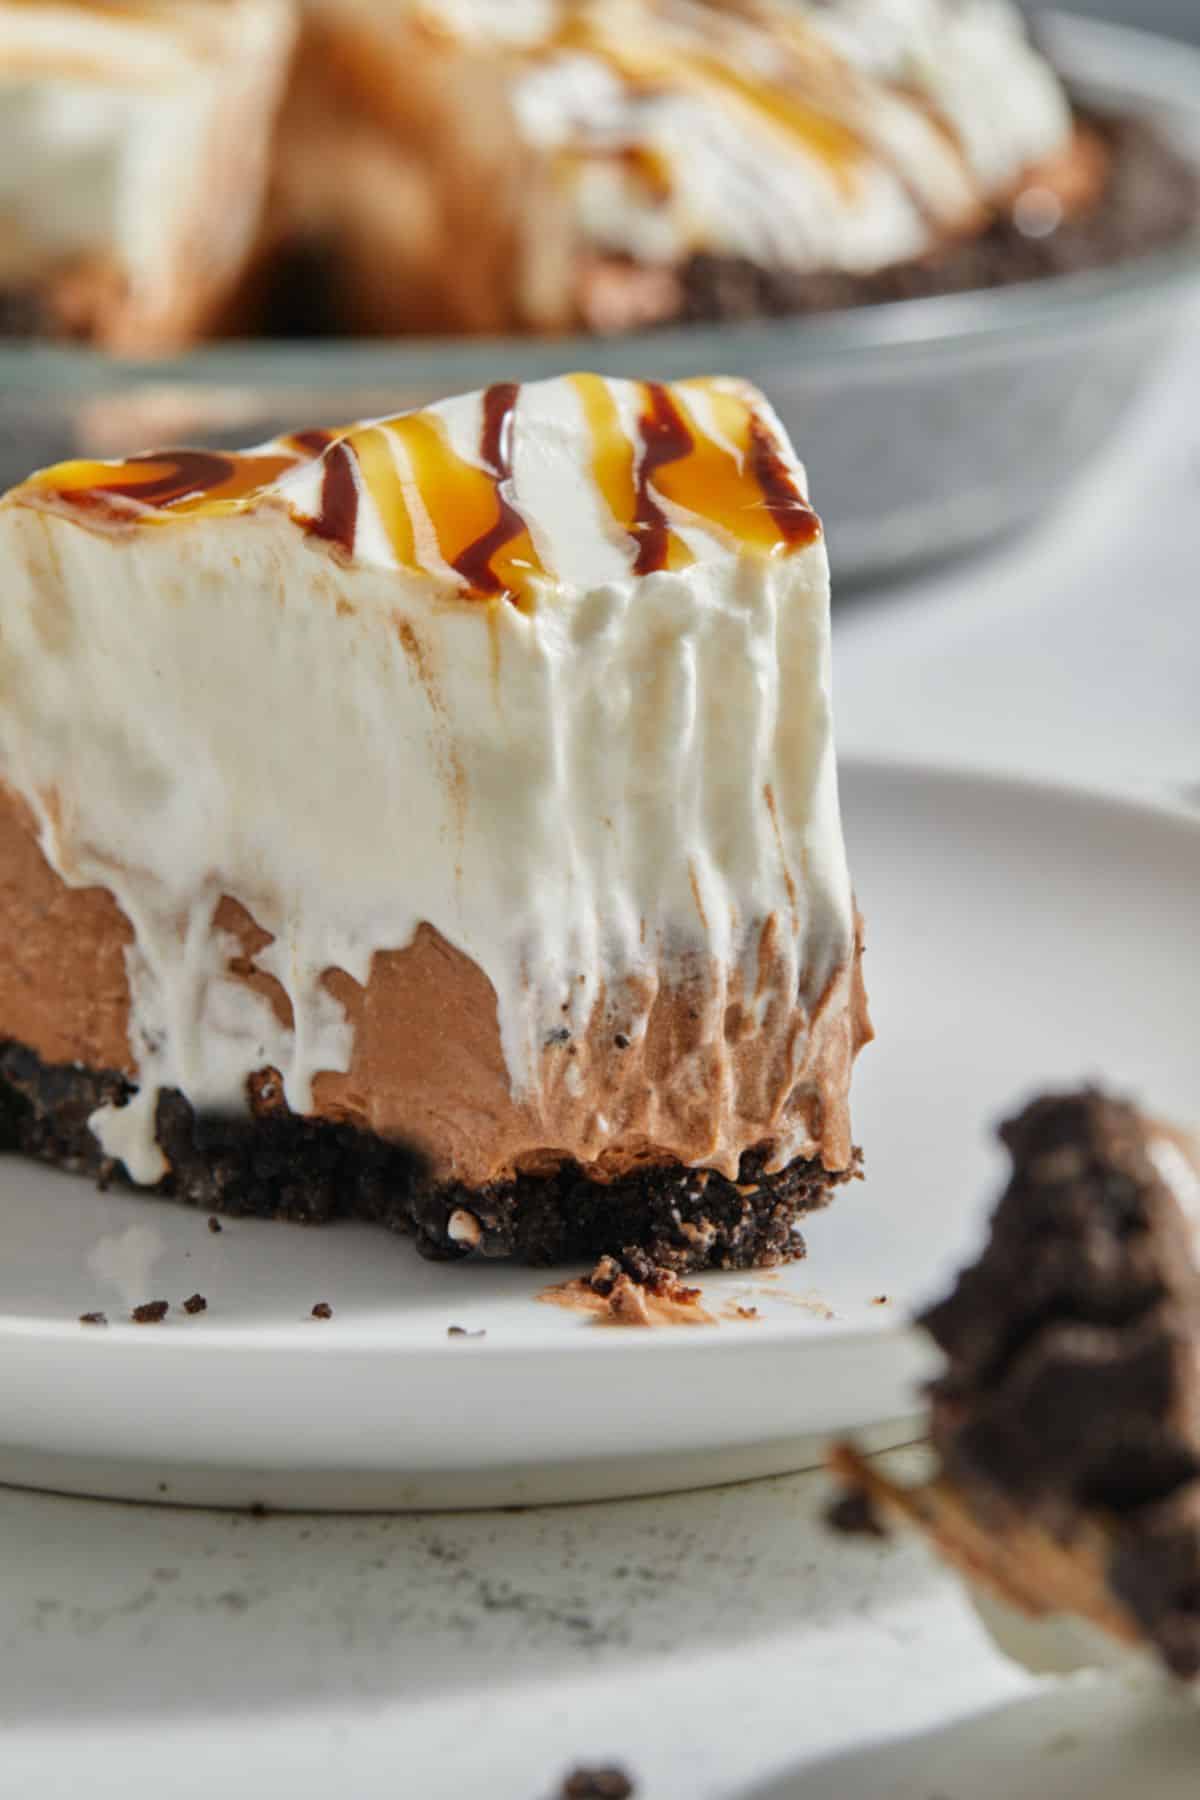 Close up of a slice of chocolate mousse pie on a white plate with a forkful taken out